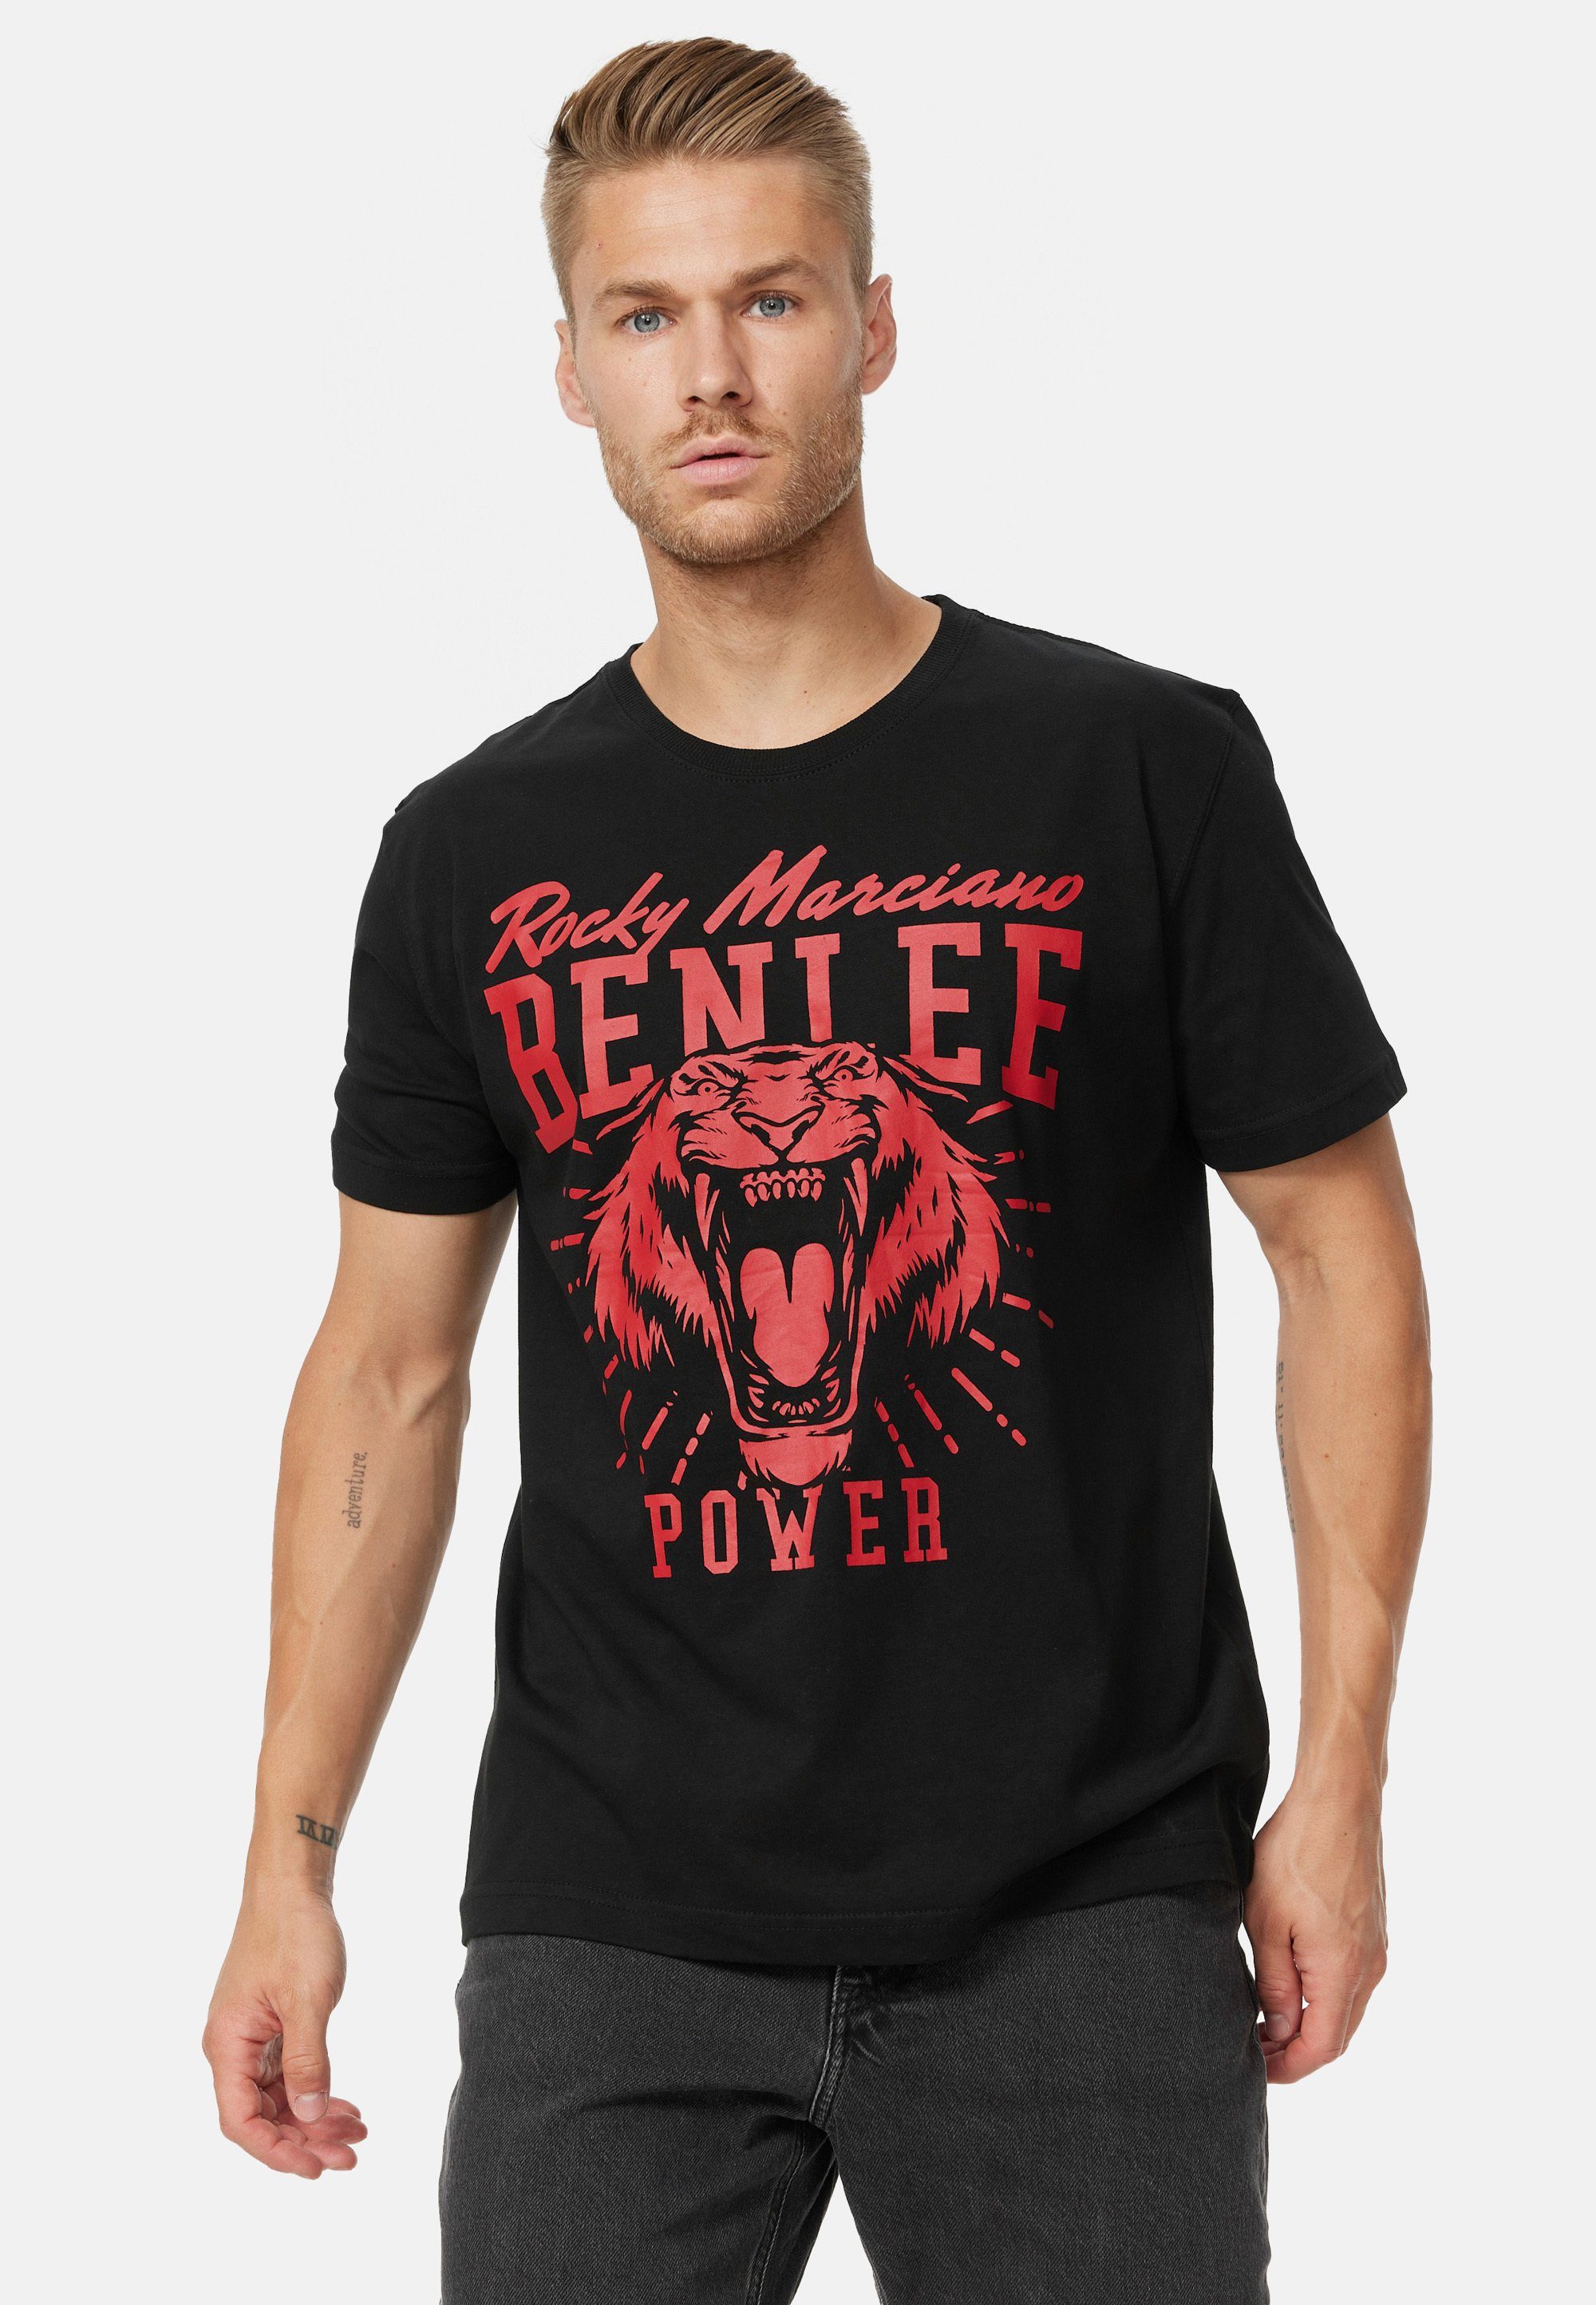 Benlee Rocky Marciano T-Shirt TIGER POWER Black/Red